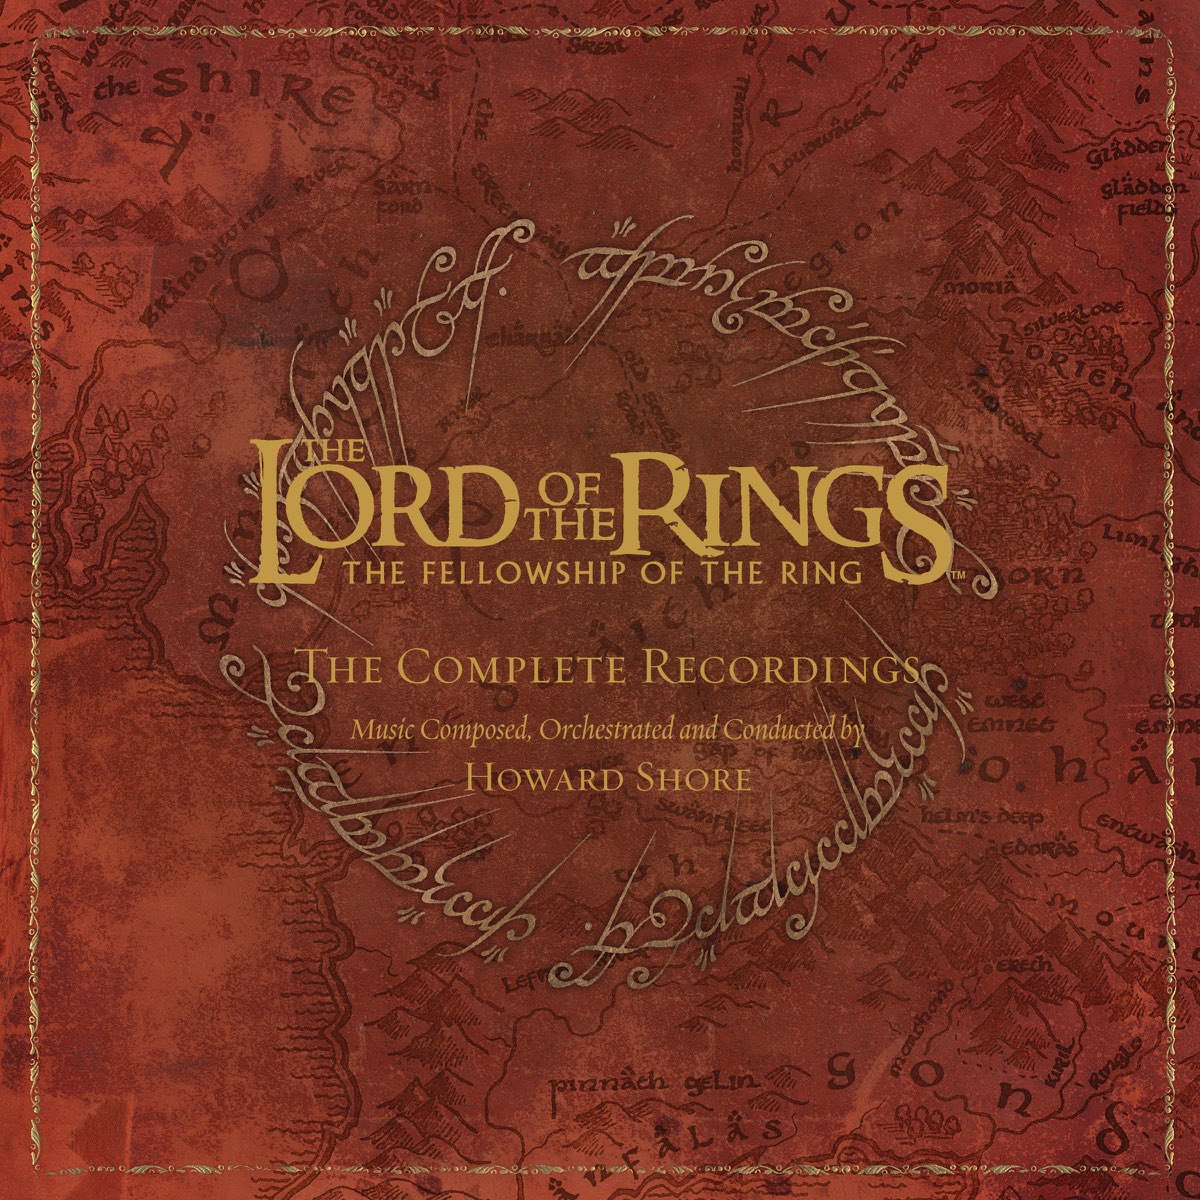 LORD OF THE RINGS: THE TWO TOWERS O.S.T. - The Lord of the Rings: The Two  Towers (Original Soundtrack) - Amazon.com Music